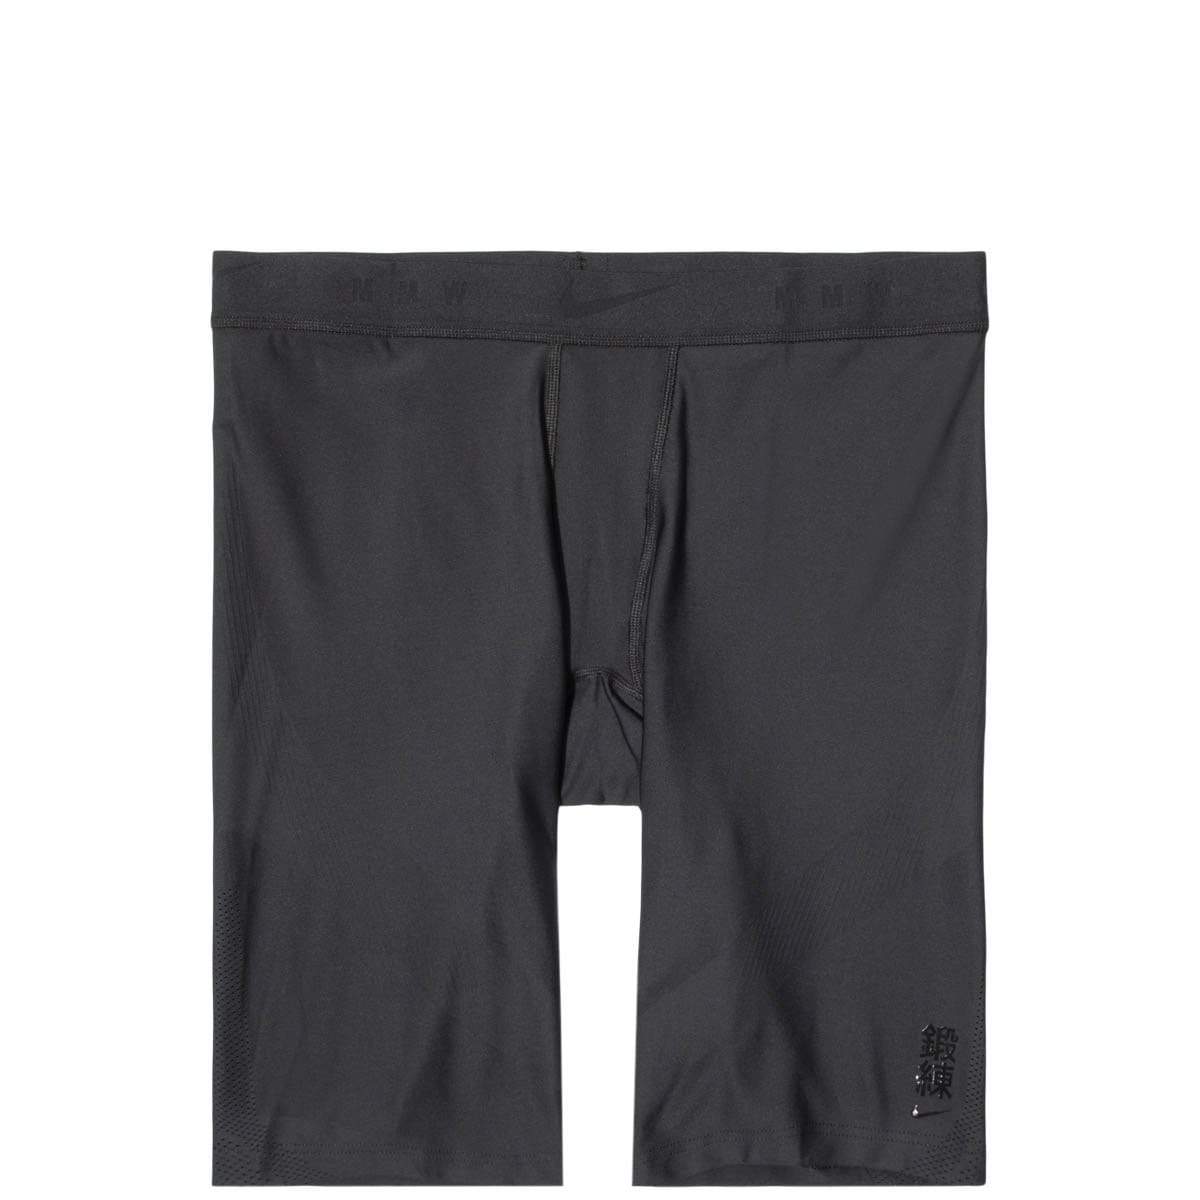 Mens Zip Off Trousers | Convertible | Sports Direct